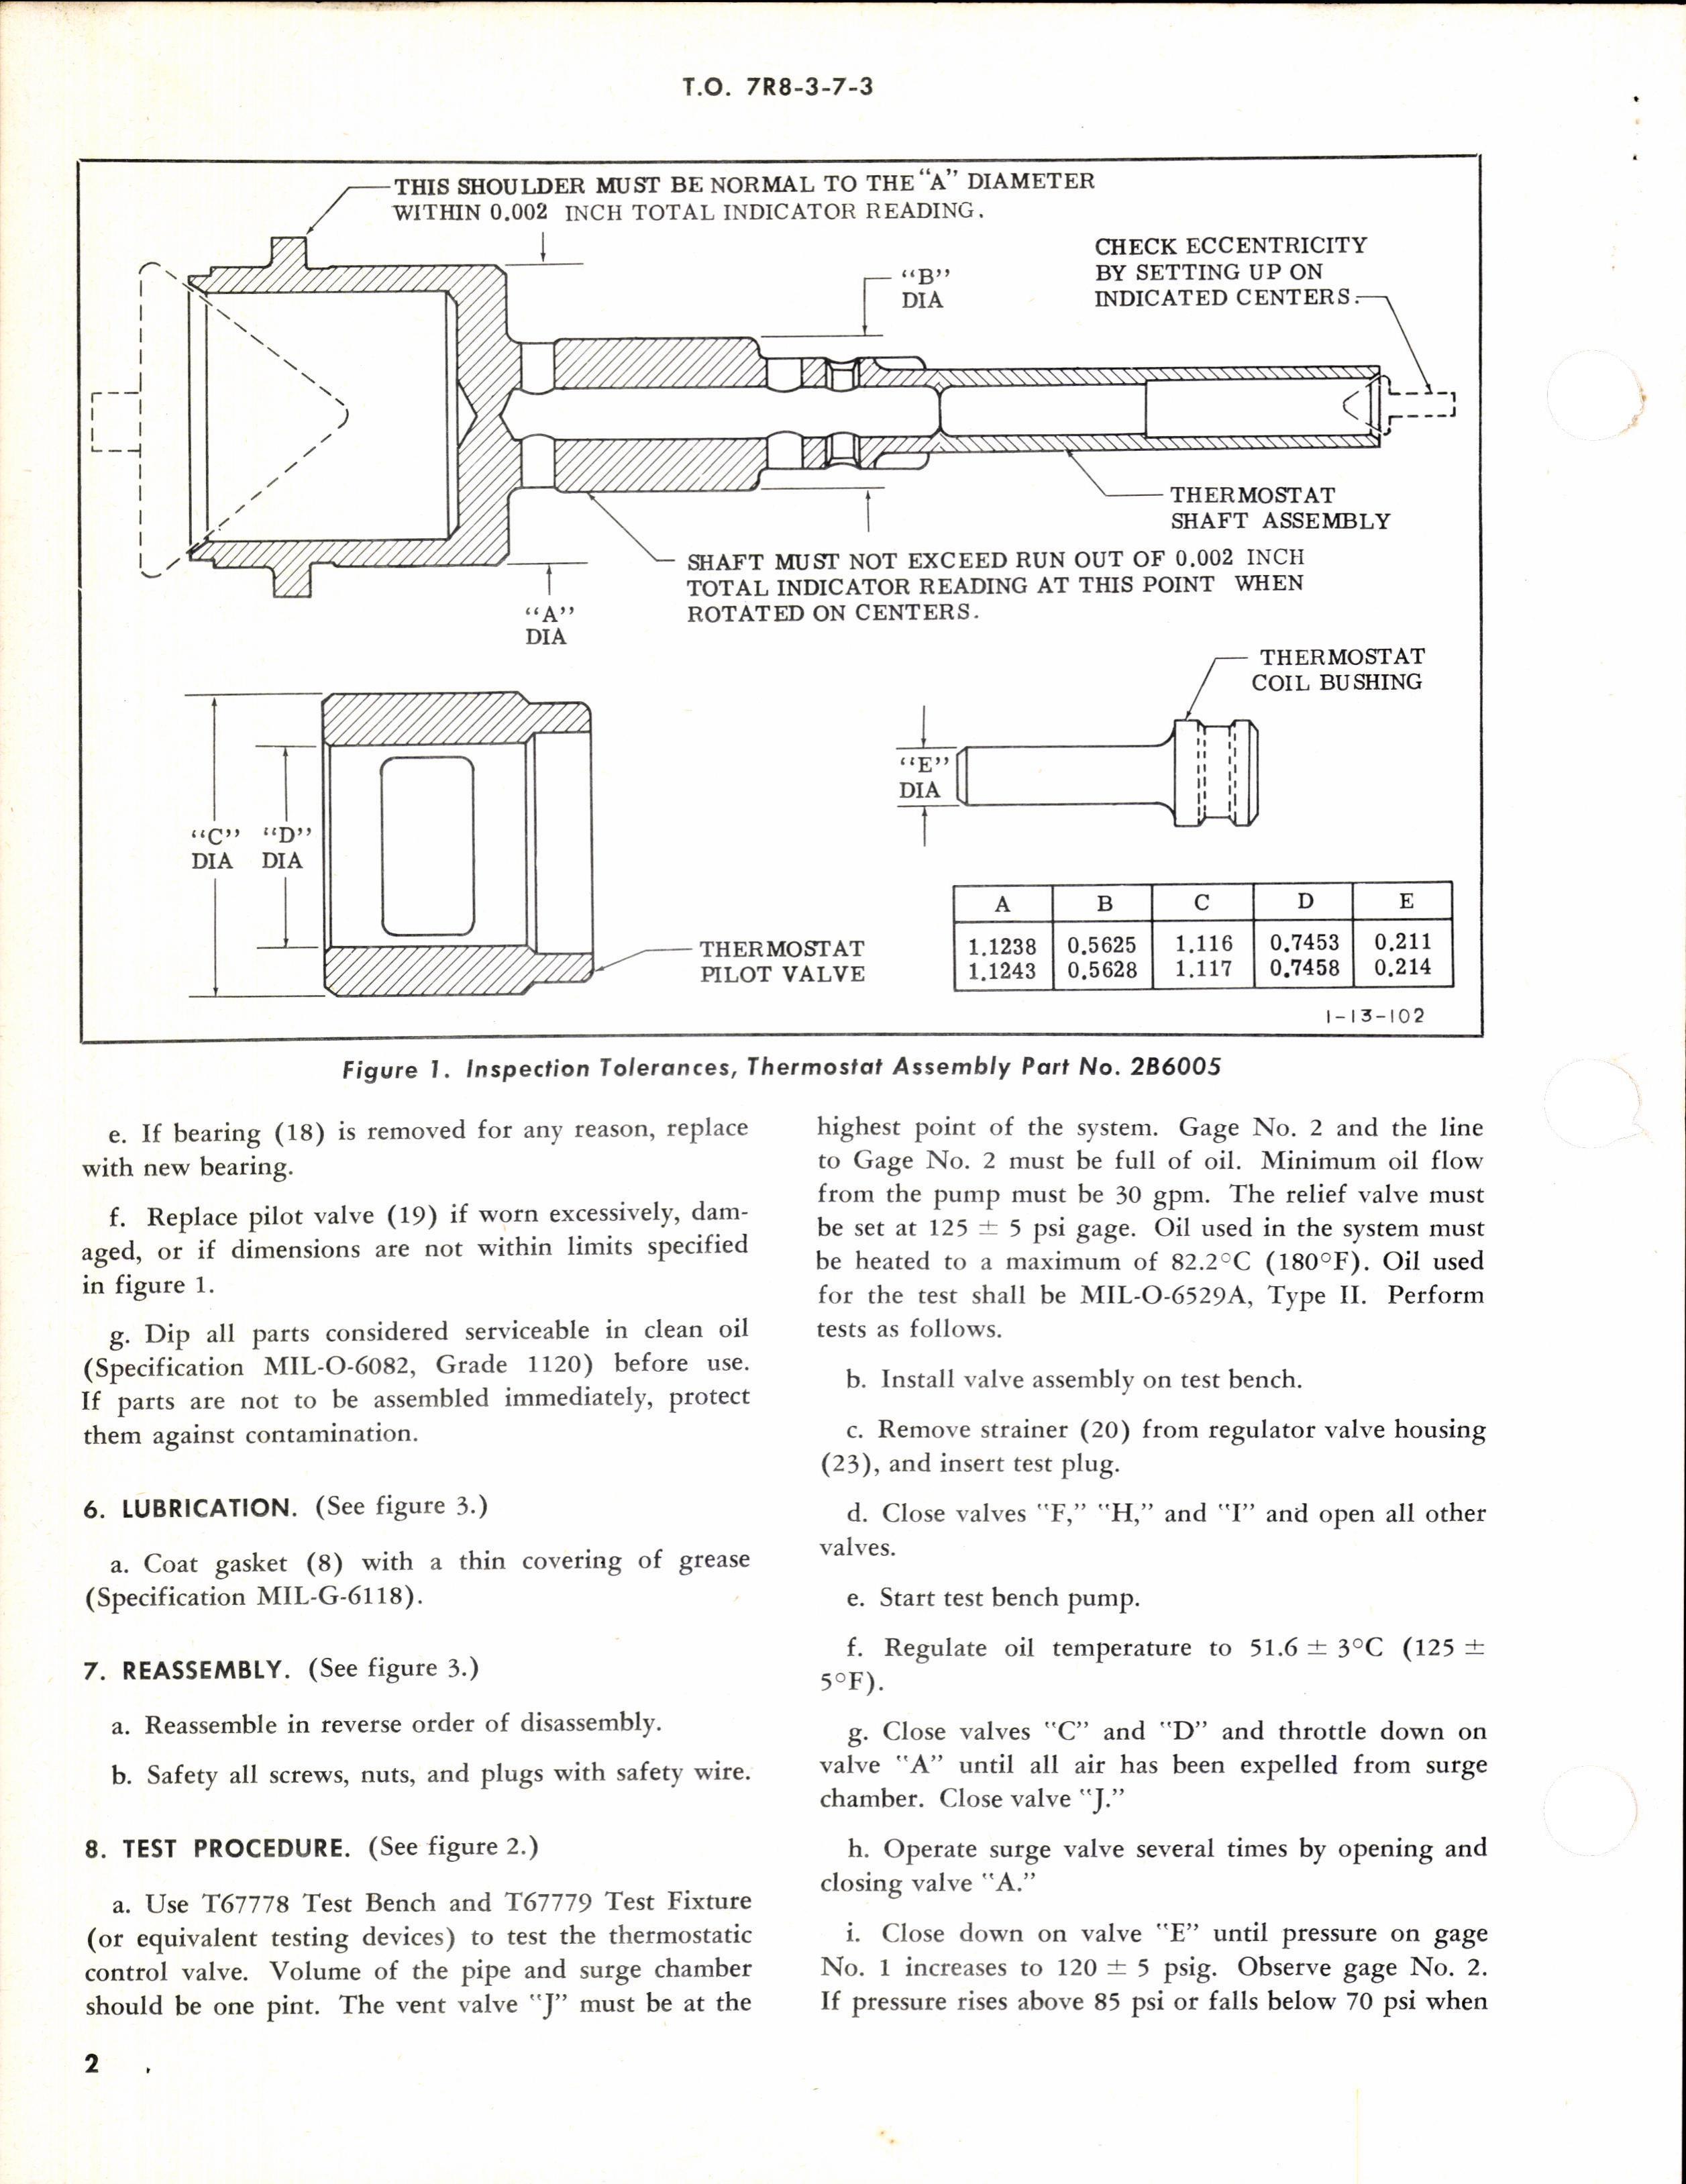 Sample page 2 from AirCorps Library document: Overhaul Instructions with Parts Breakdown For Inlet Thermostatic By-Pass Control Valve